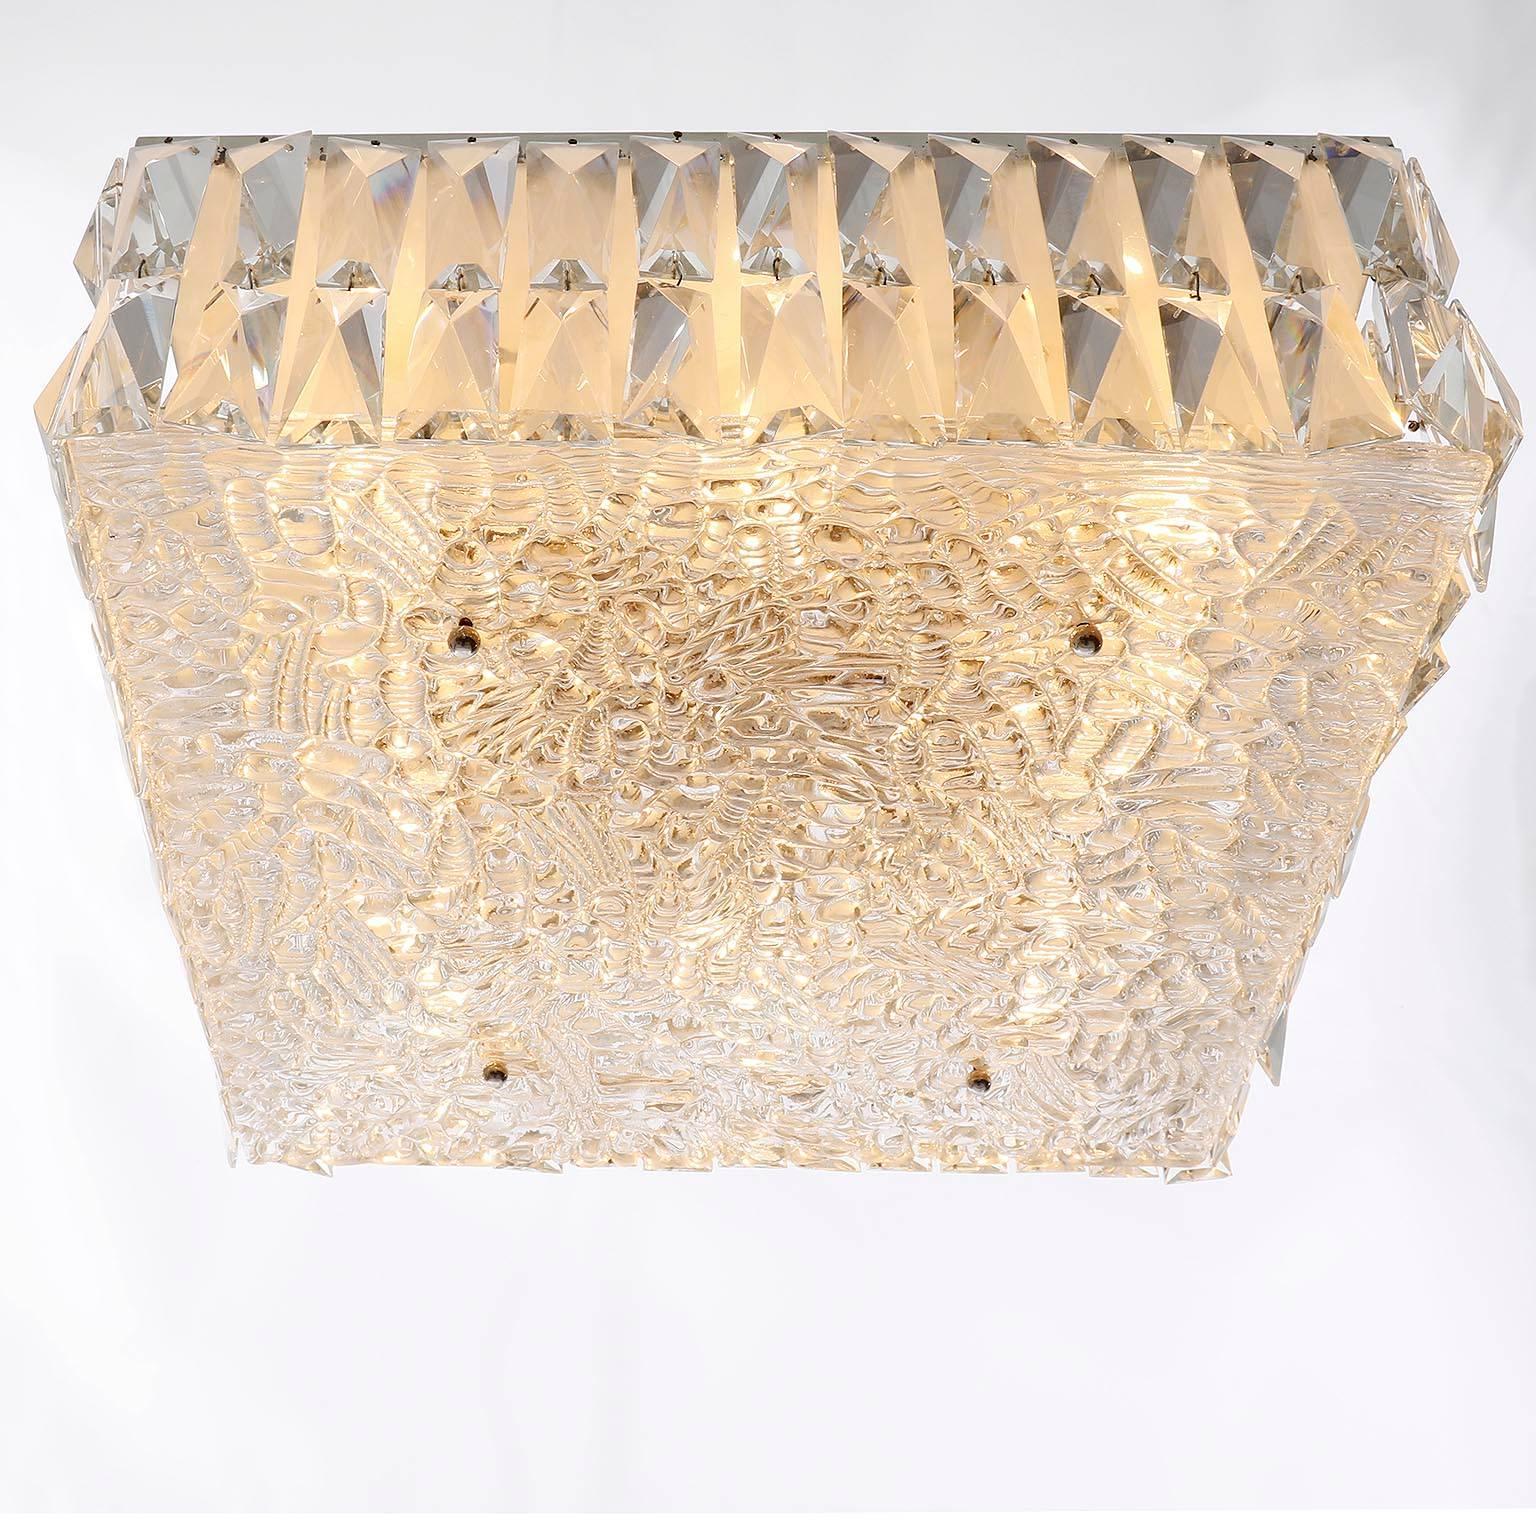 Austrian Square Kalmar Light Fixture, Textured and Crystal Glass, 1960s, One of Two